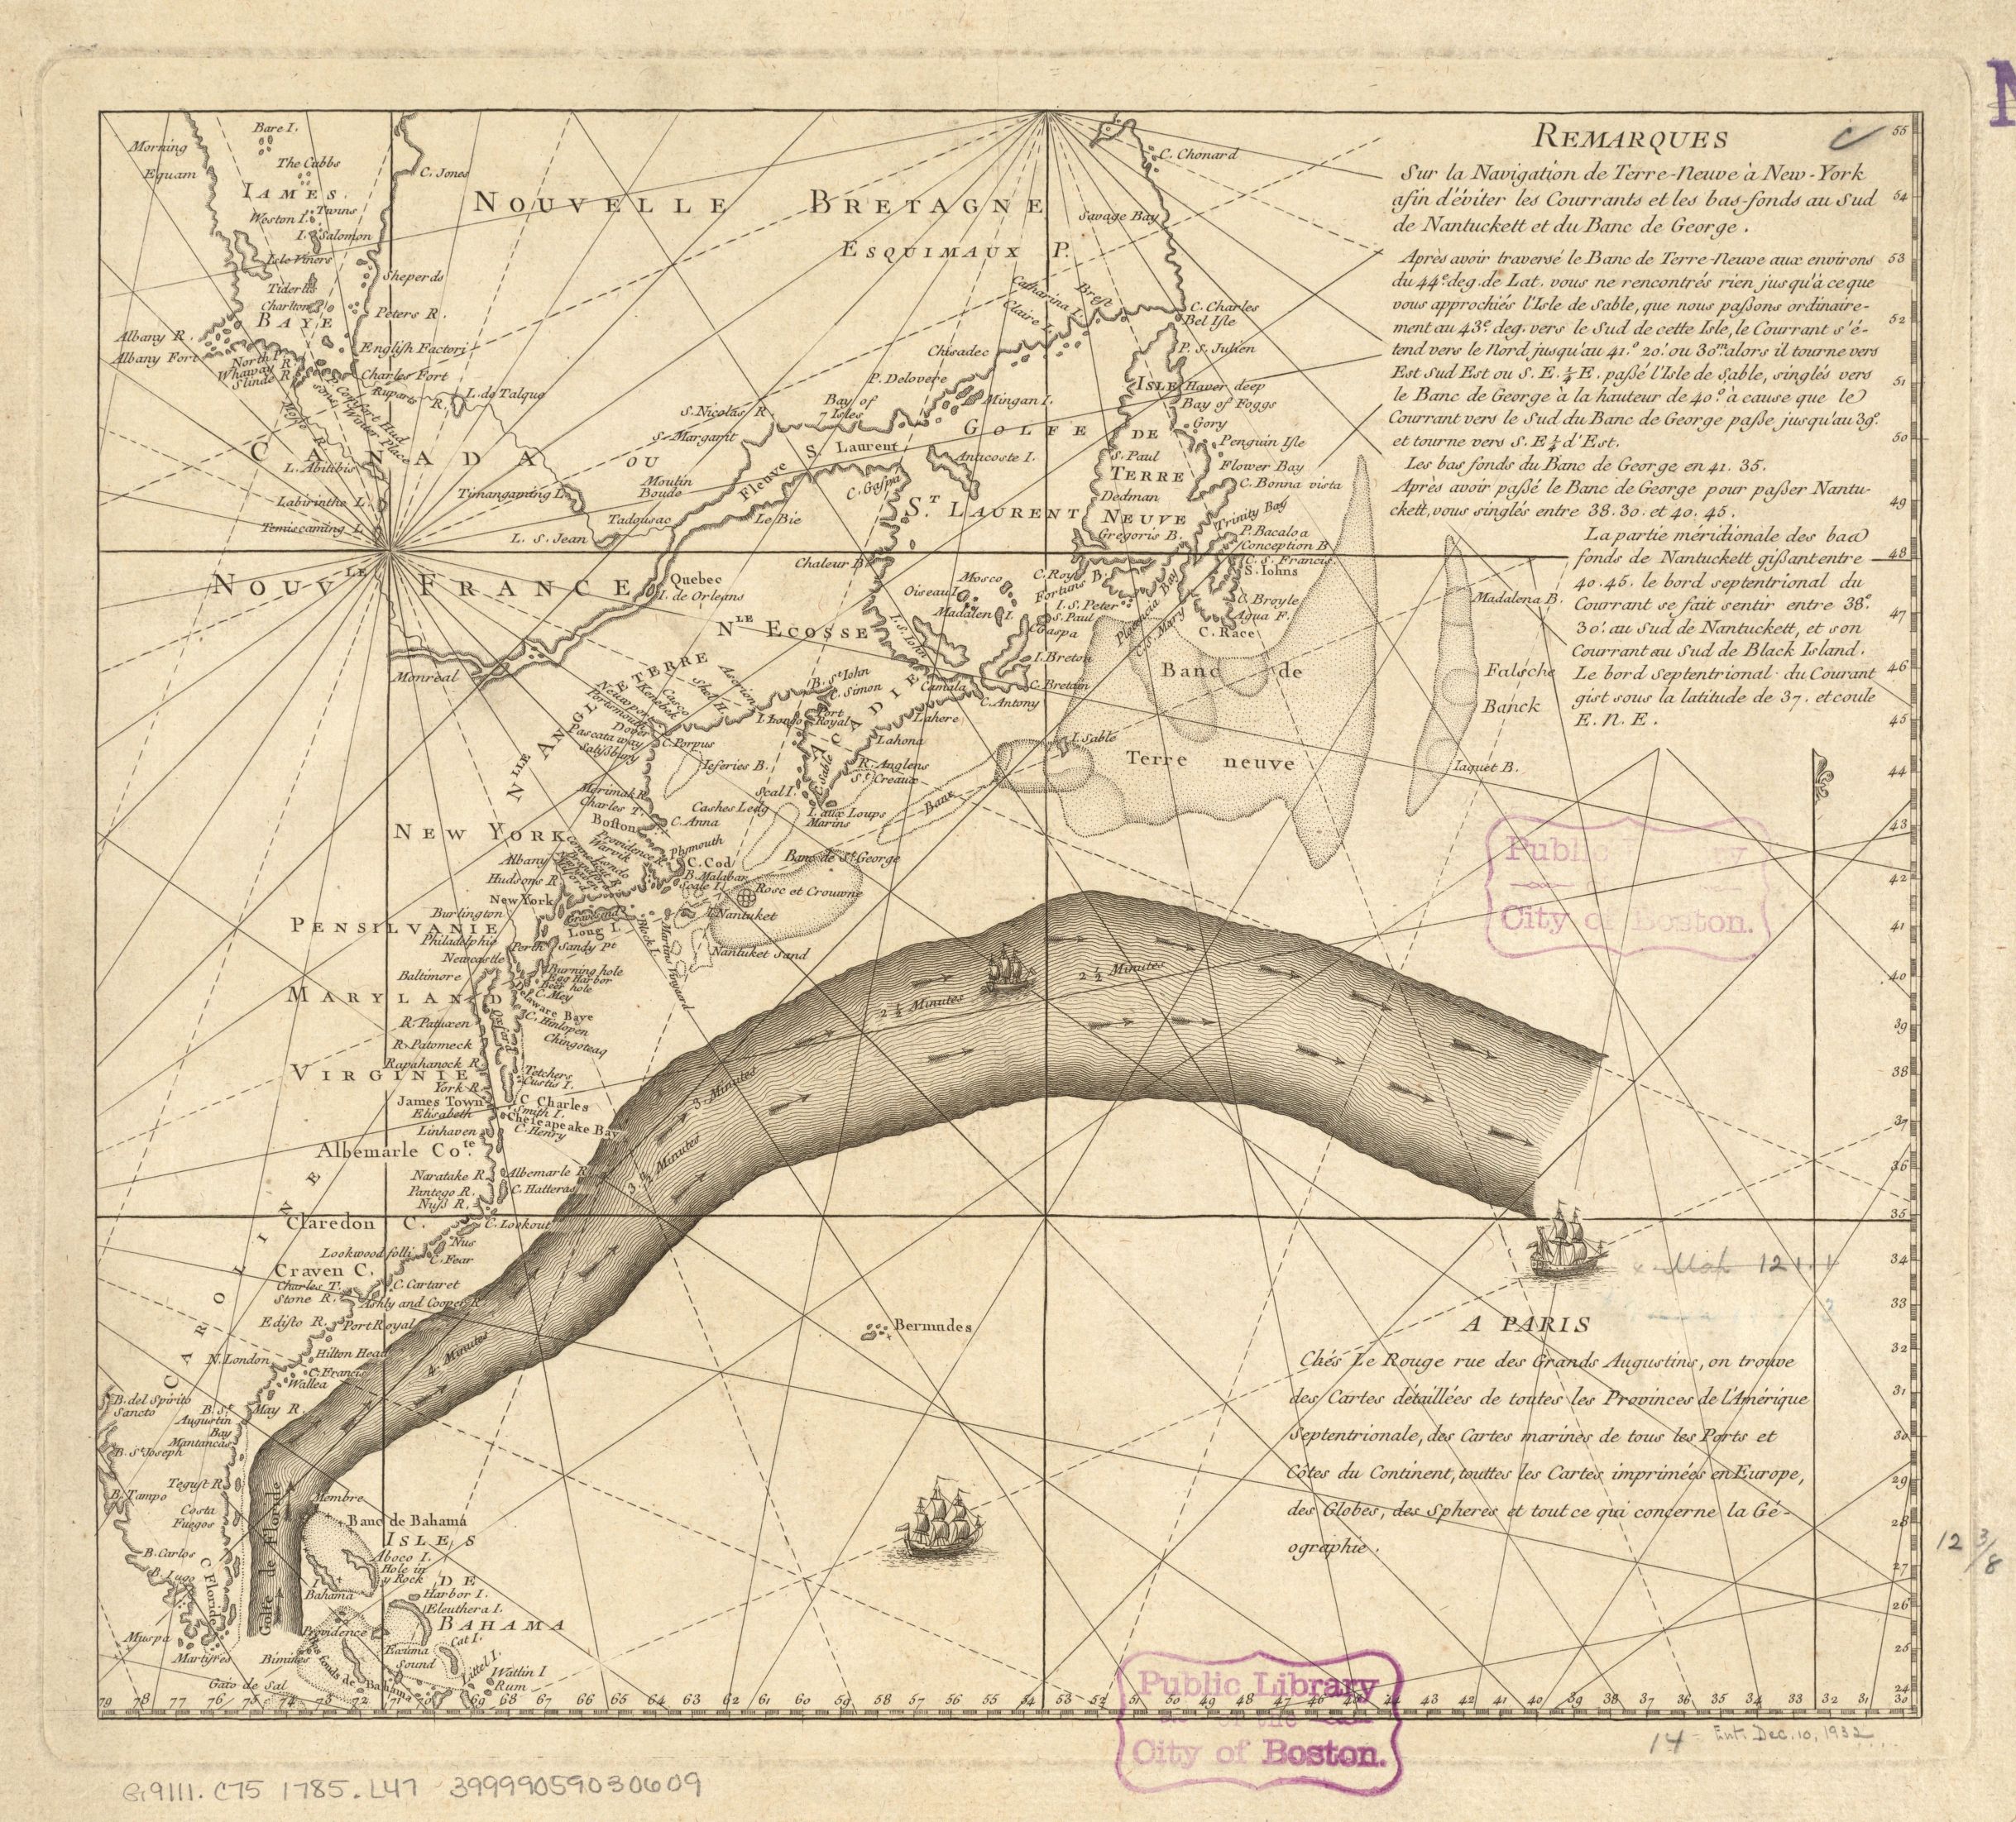 black and white French language printed map showing the course and location of the gulf stream